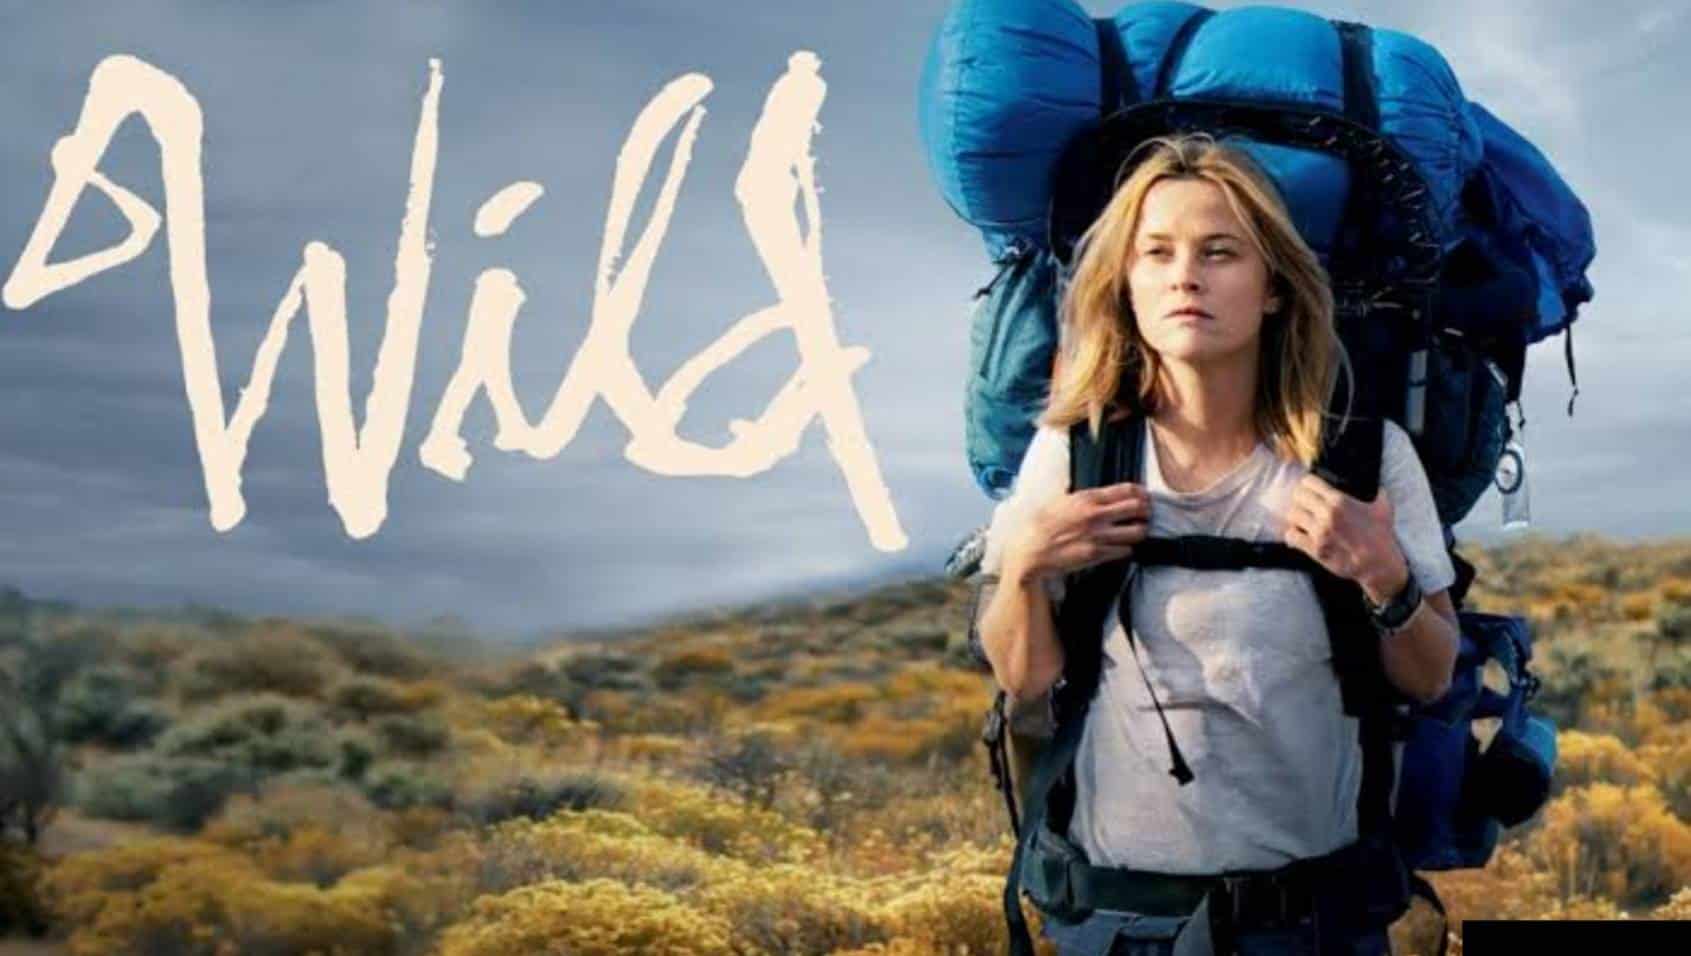 Wild- Based On True Events